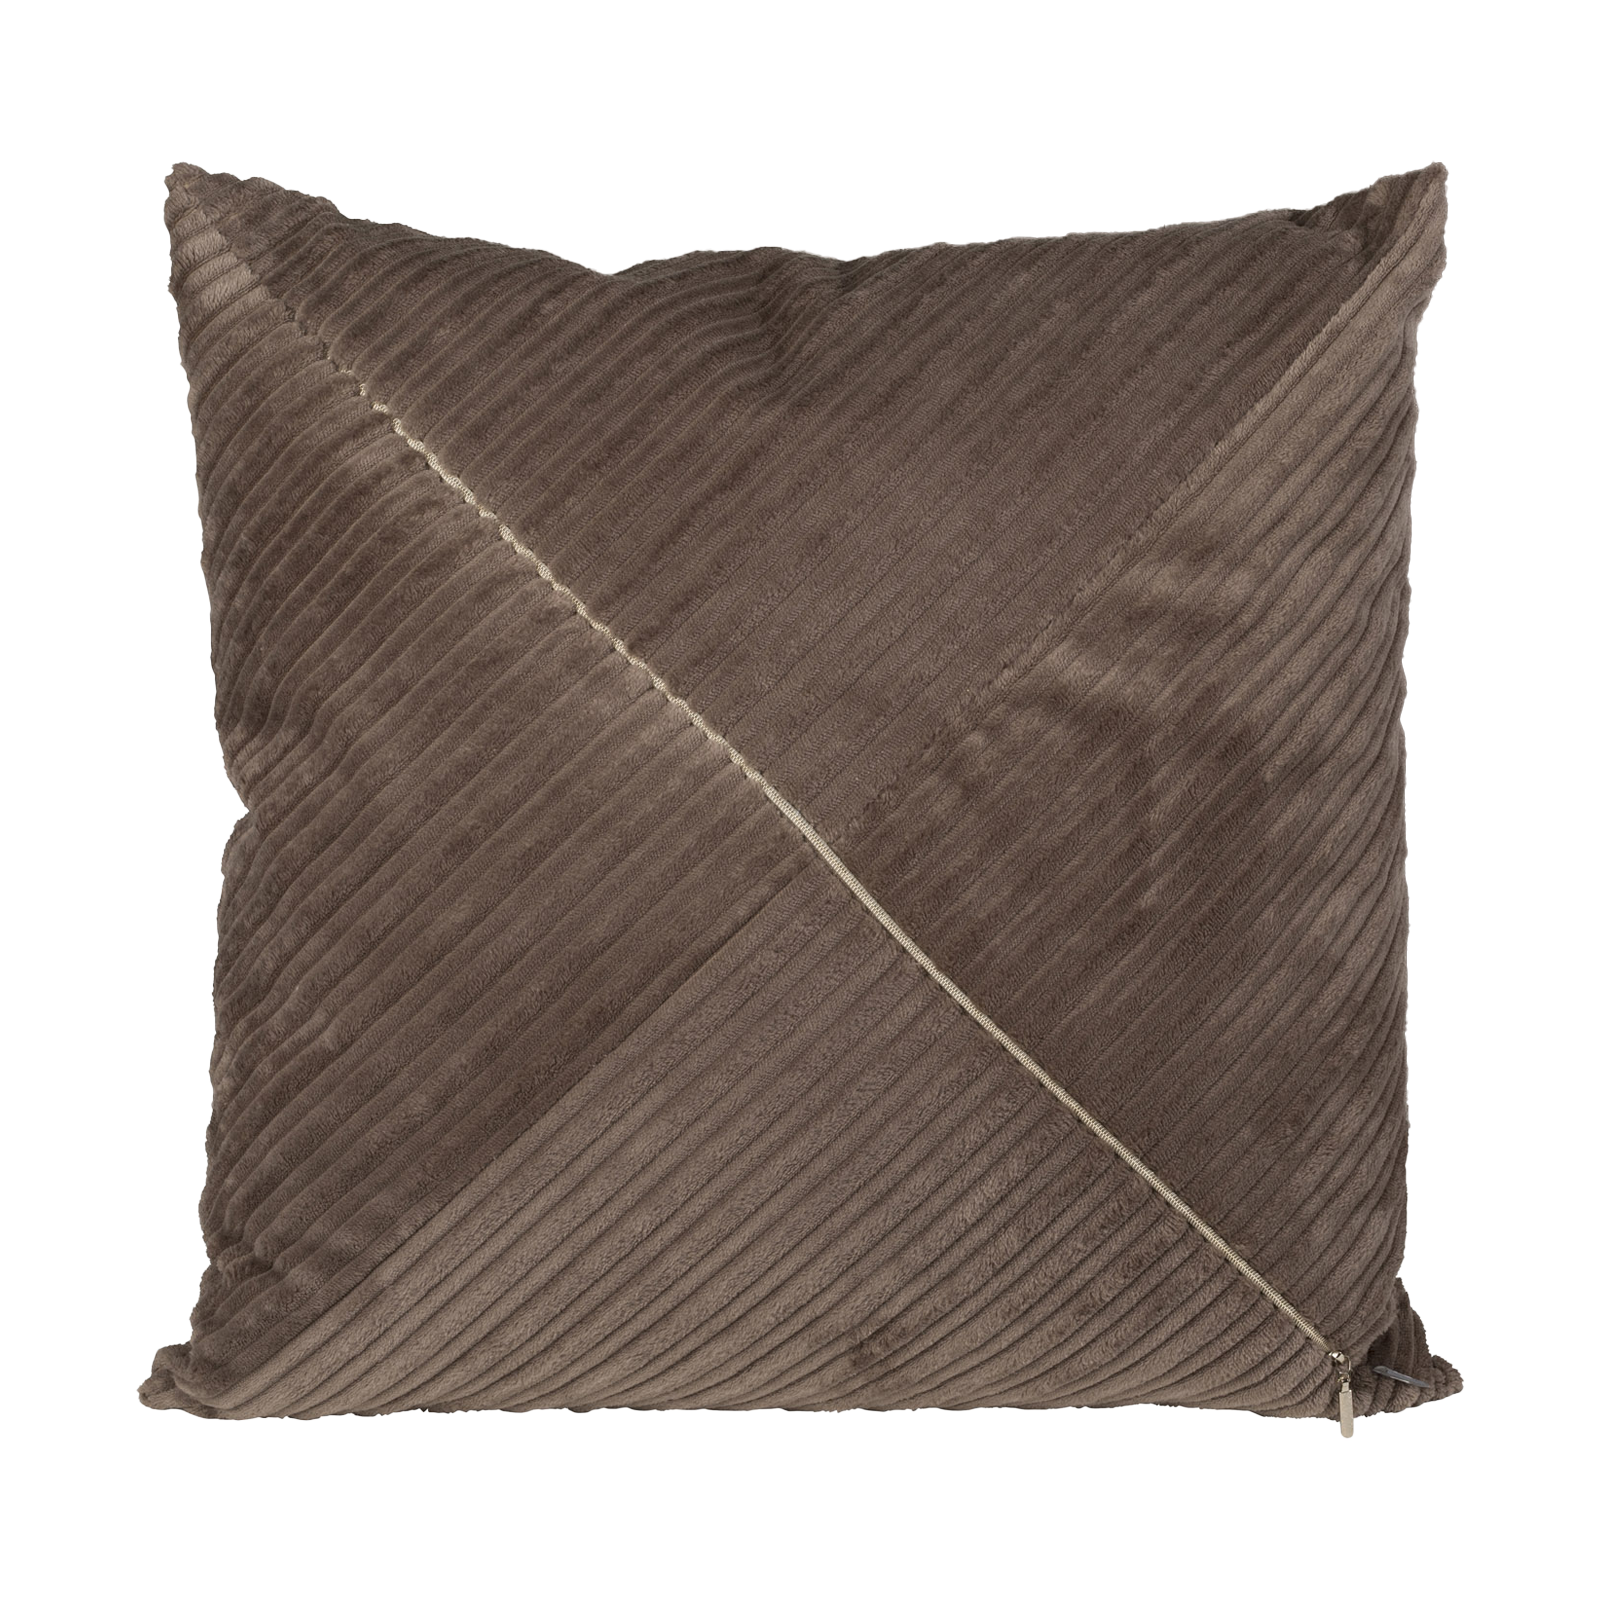 Größe: 50x 50 cm Farbe: taupe #farbe_taupe